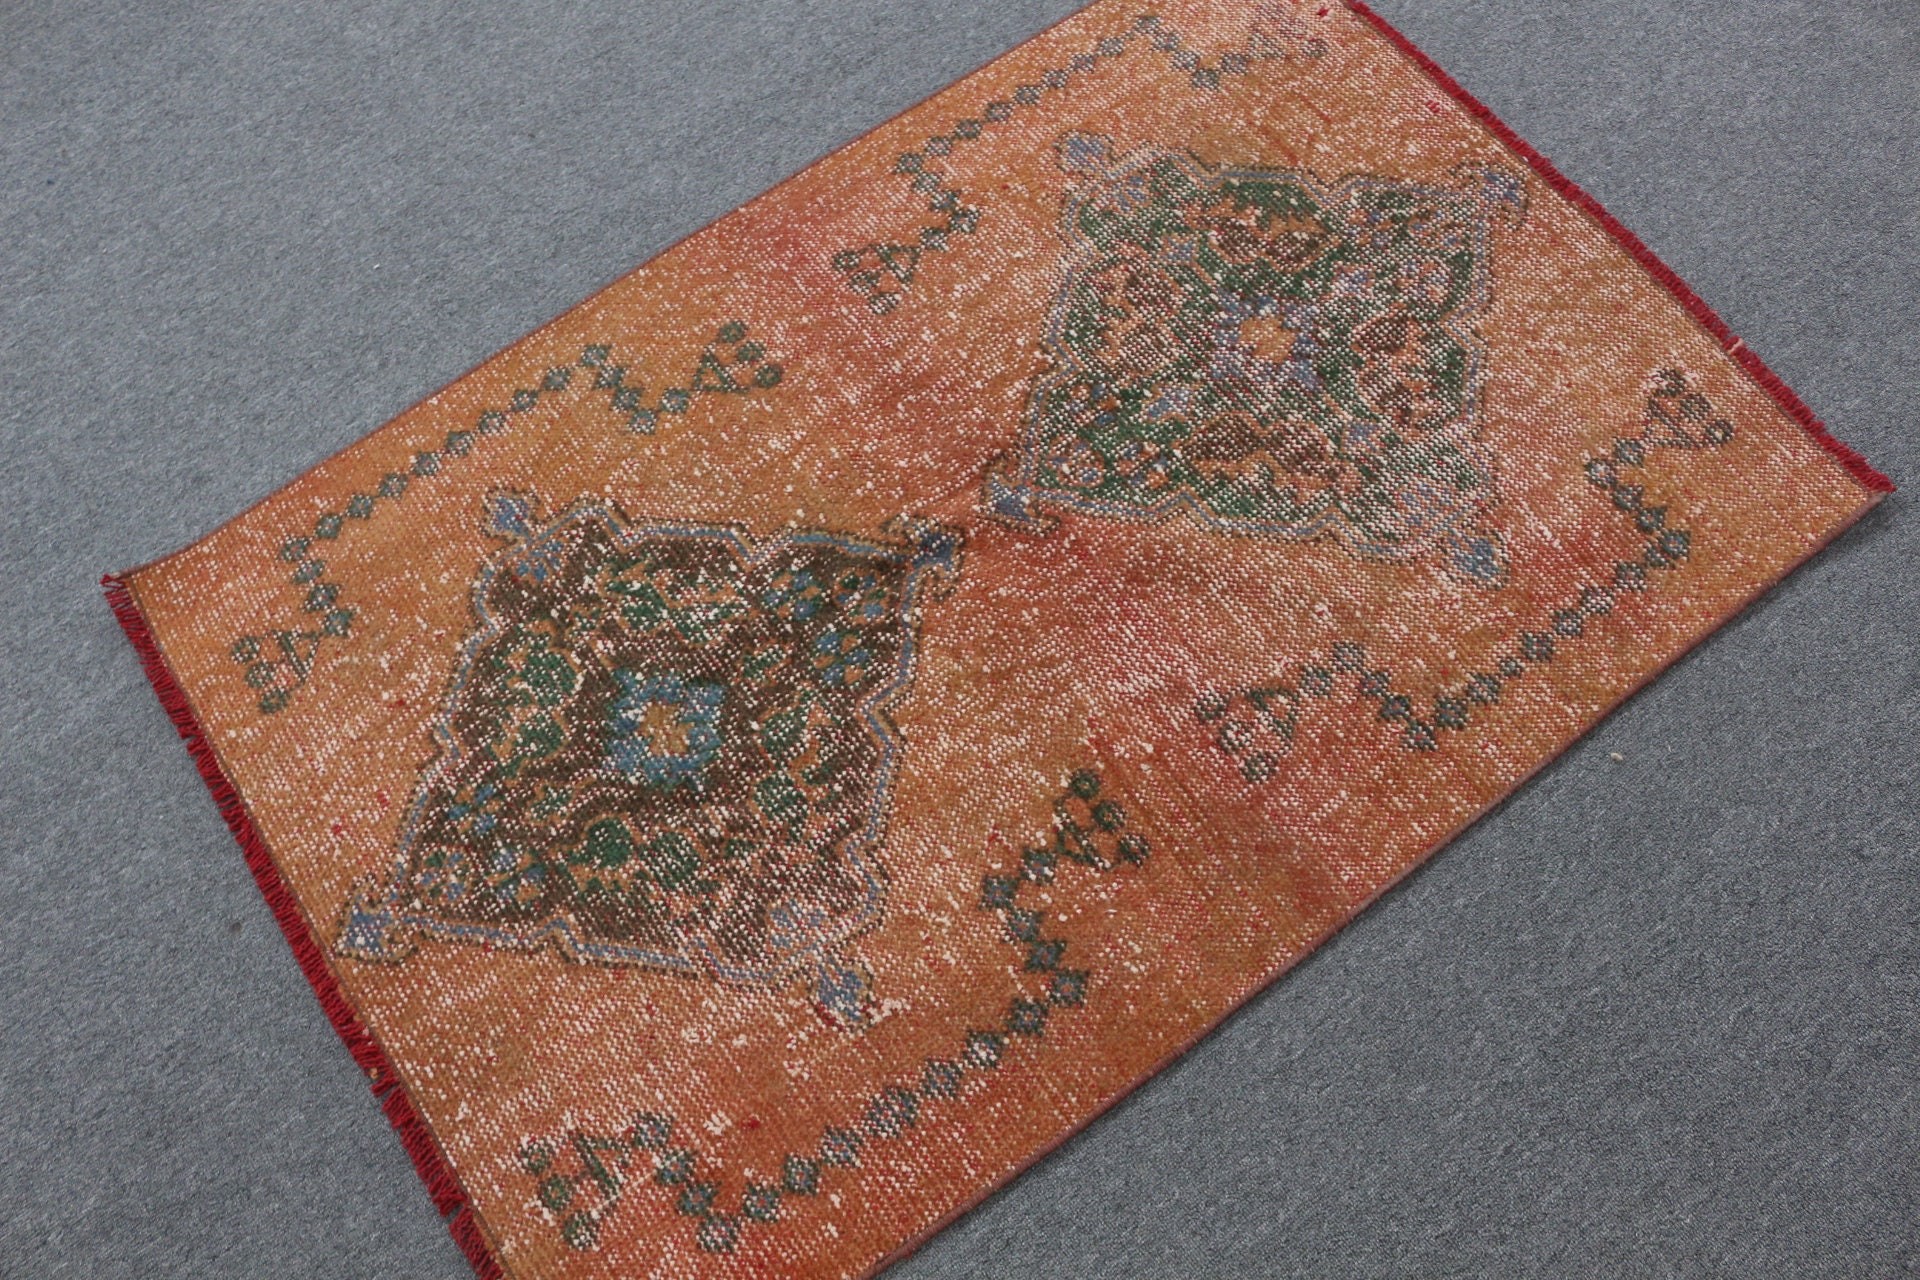 Bedroom Rug, Antique Rug, Door Mat Rug, Red Anatolian Rug, Hand Knotted Rug, 2.8x4.2 ft Small Rug, Vintage Rugs, Kitchen Rugs, Turkish Rugs